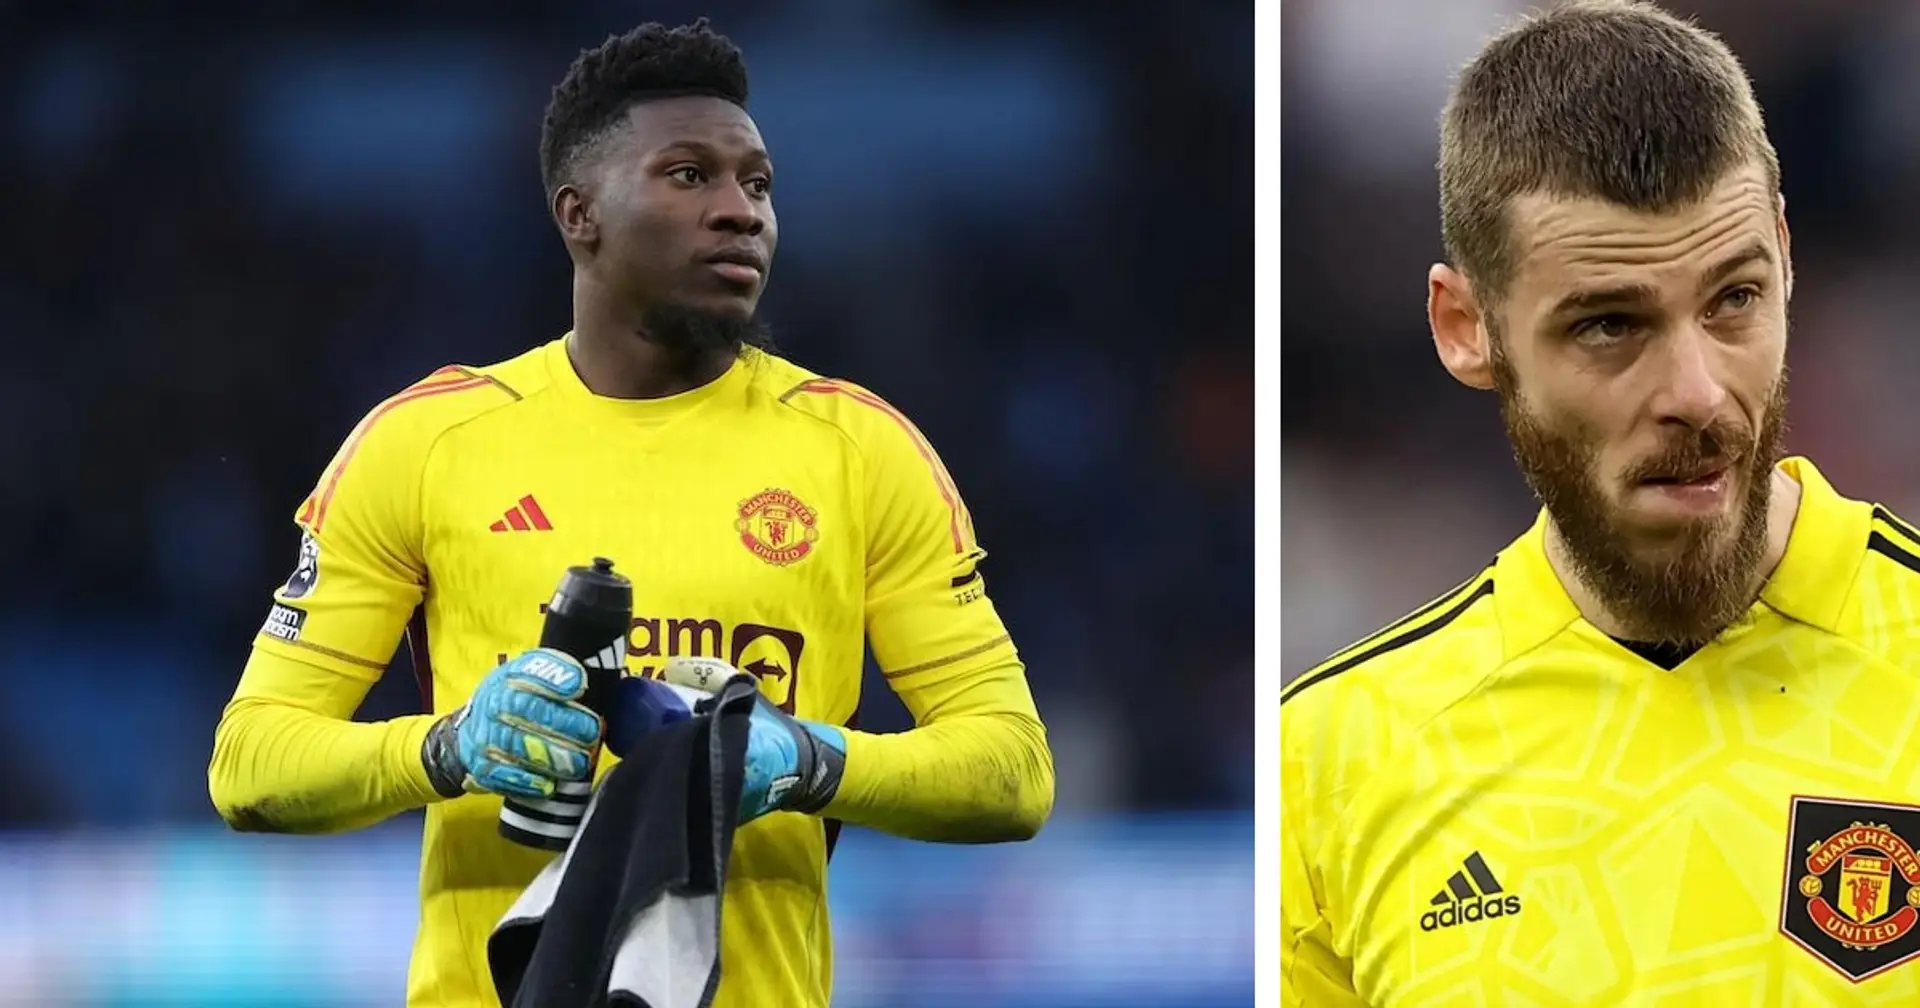 Onana embarrasses De Gea in one key stat after impressive Manchester derby showing